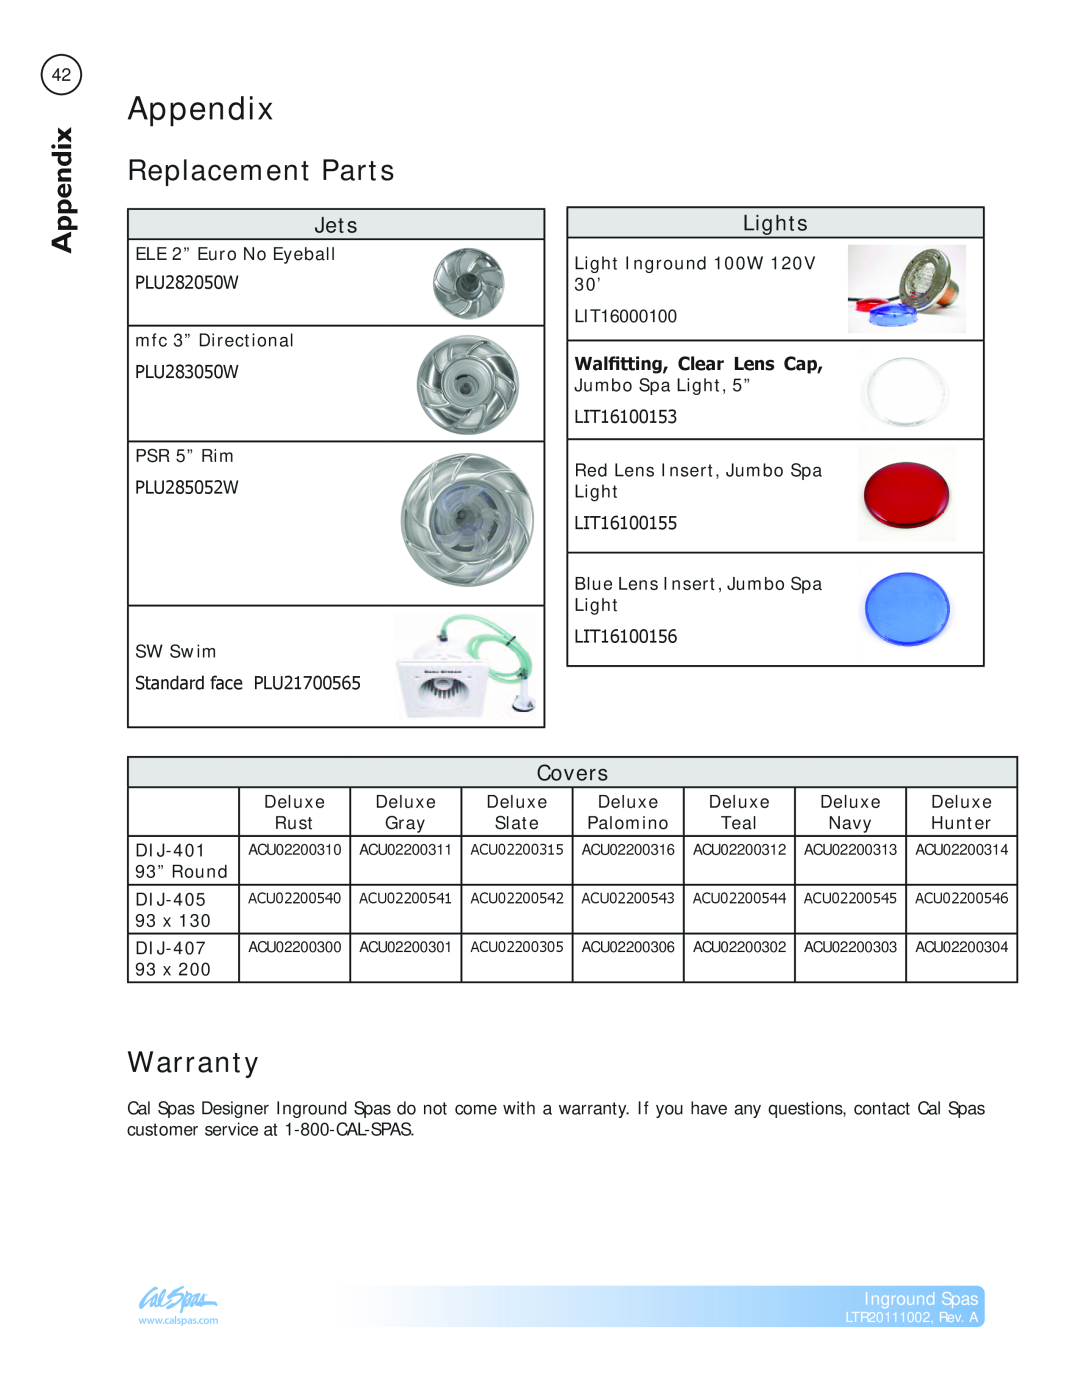 Cal Spas LTR20111002 manual Appendix, Replacement Parts, Warranty, Jets, Lights, Covers, Inground Spas 